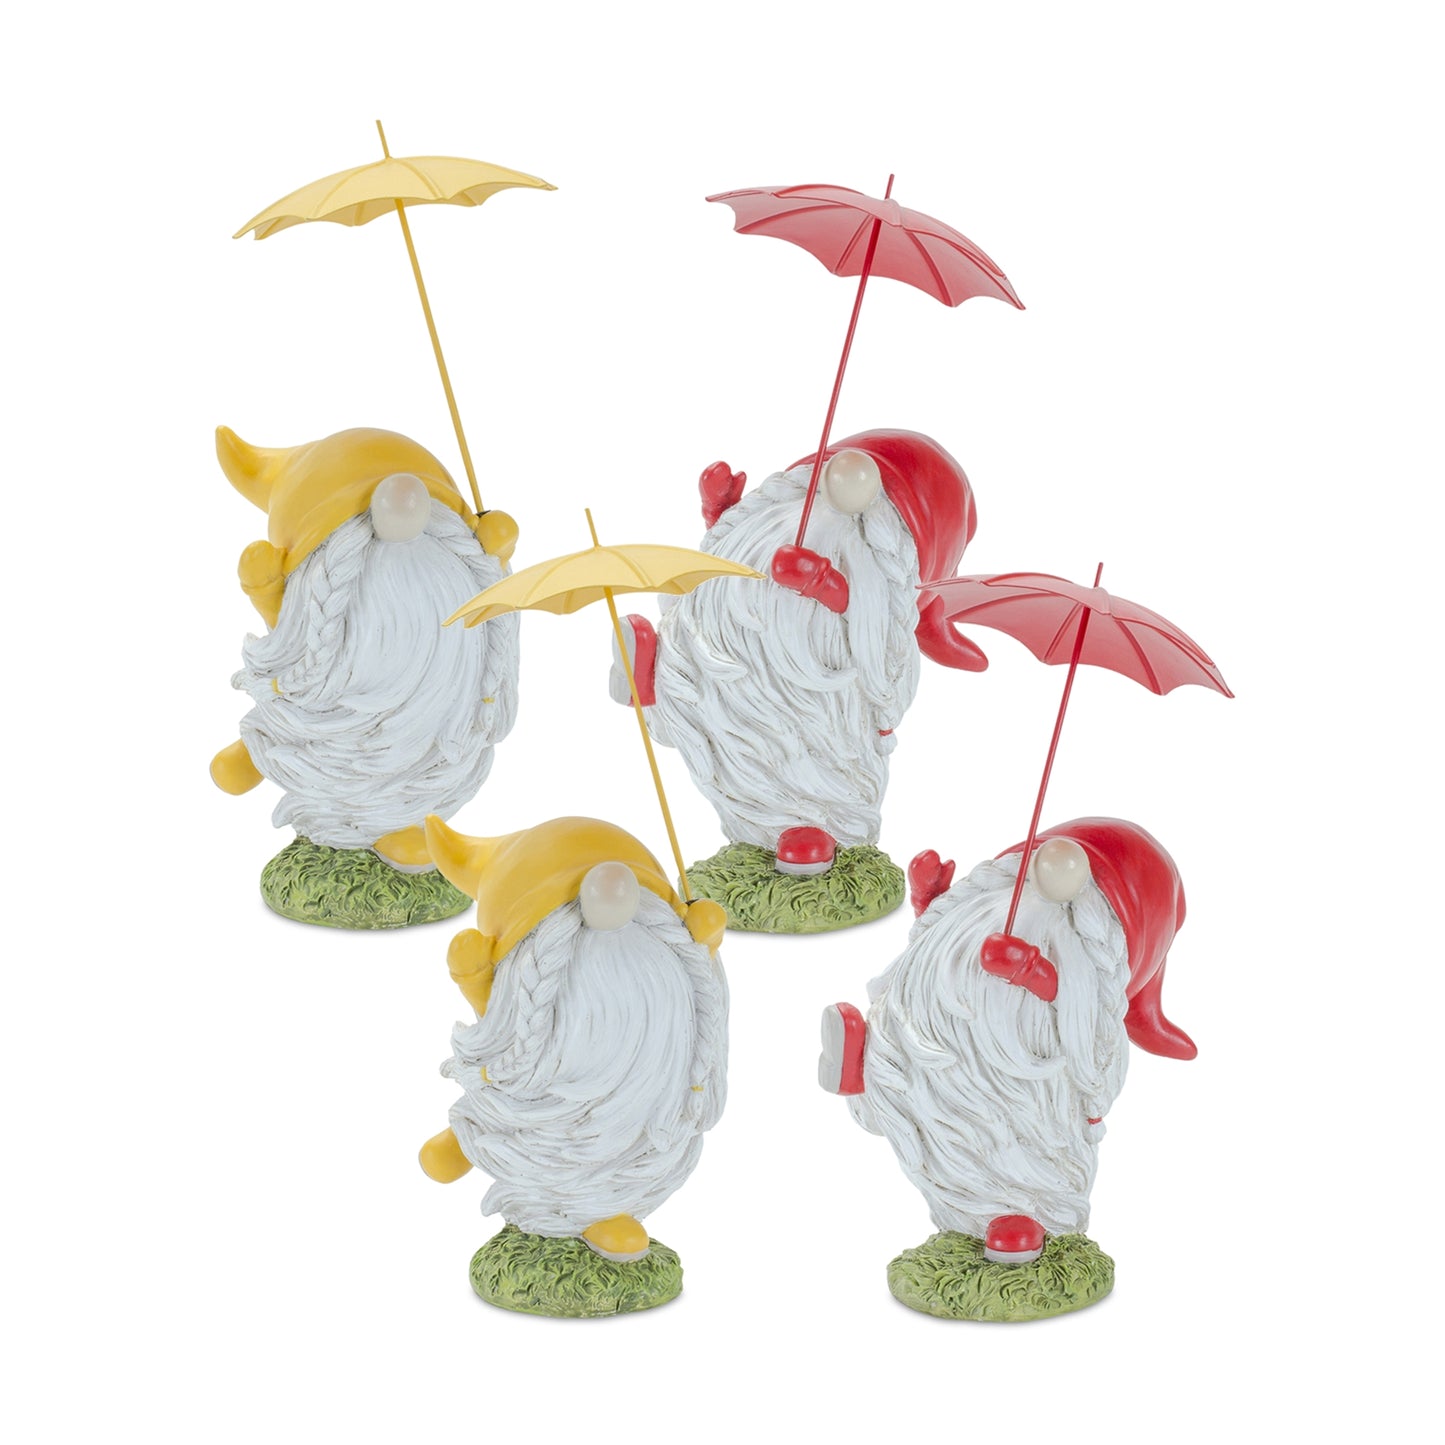 Whimsical Dancing Garden Gnome Figurine with Umbrella (Set of 2)